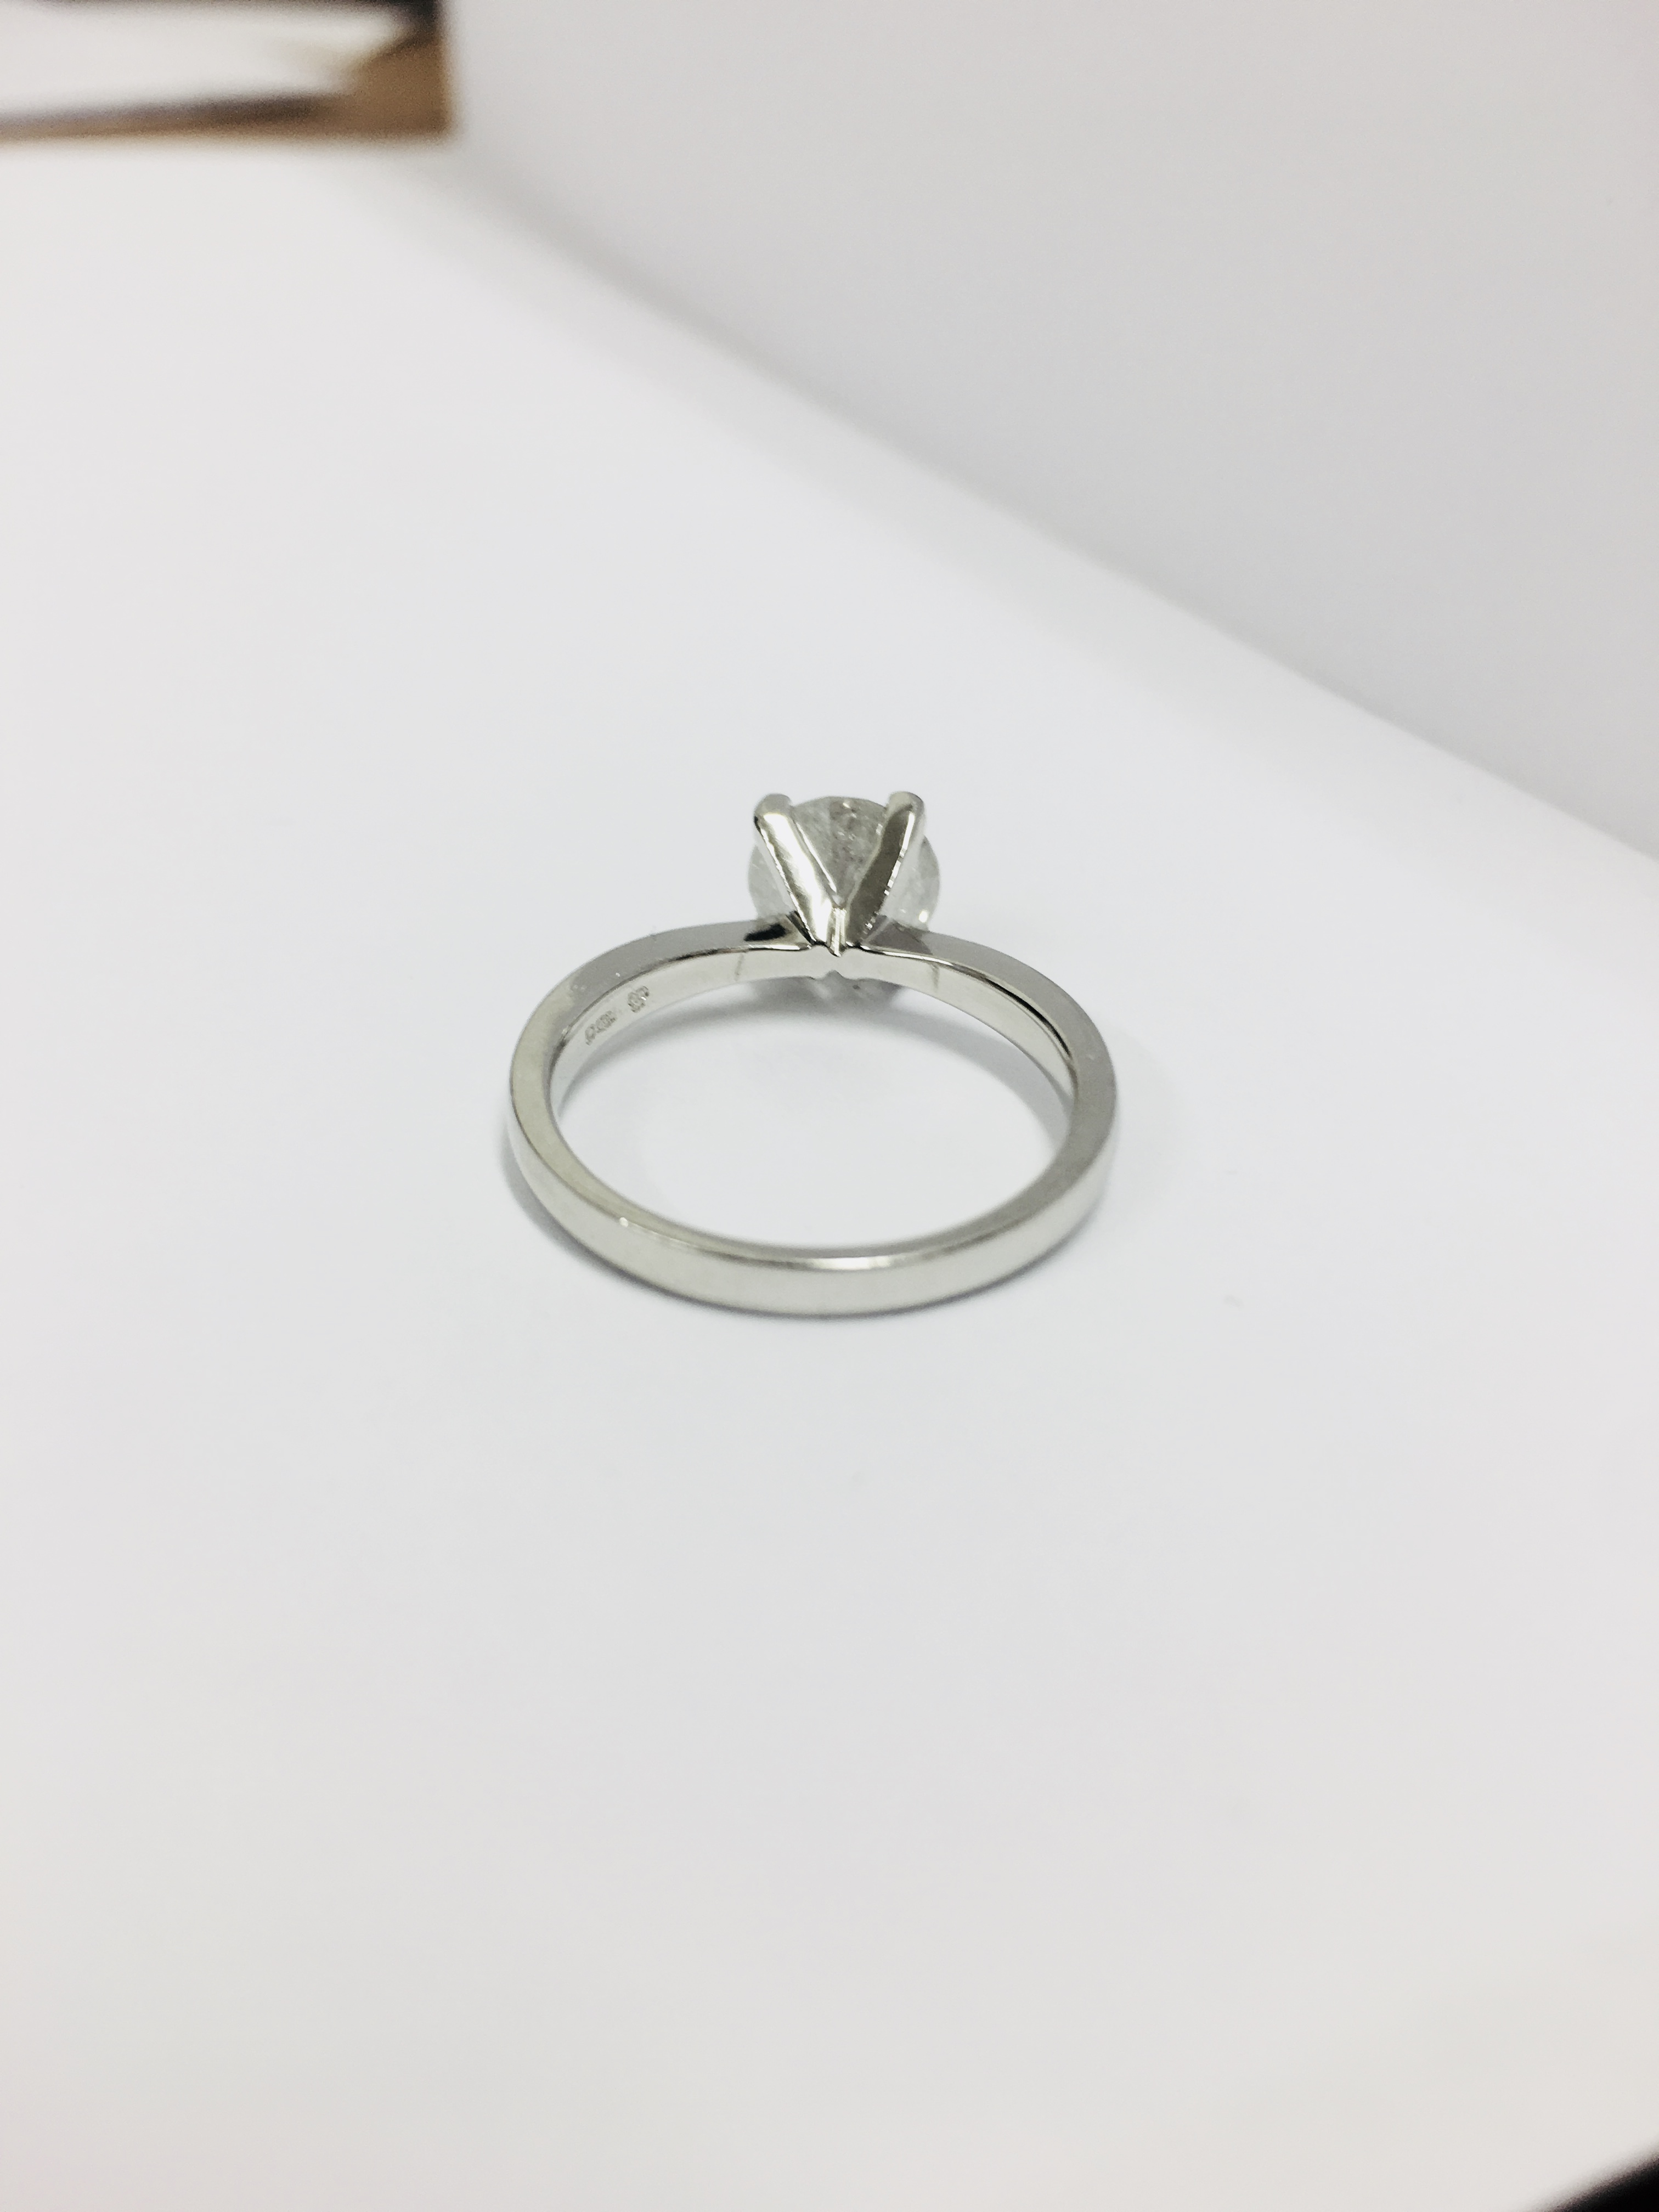 1.50Ct Diamond Solitaire Ring With An Enhanced Brilliant Cut Diamond. - Image 3 of 4